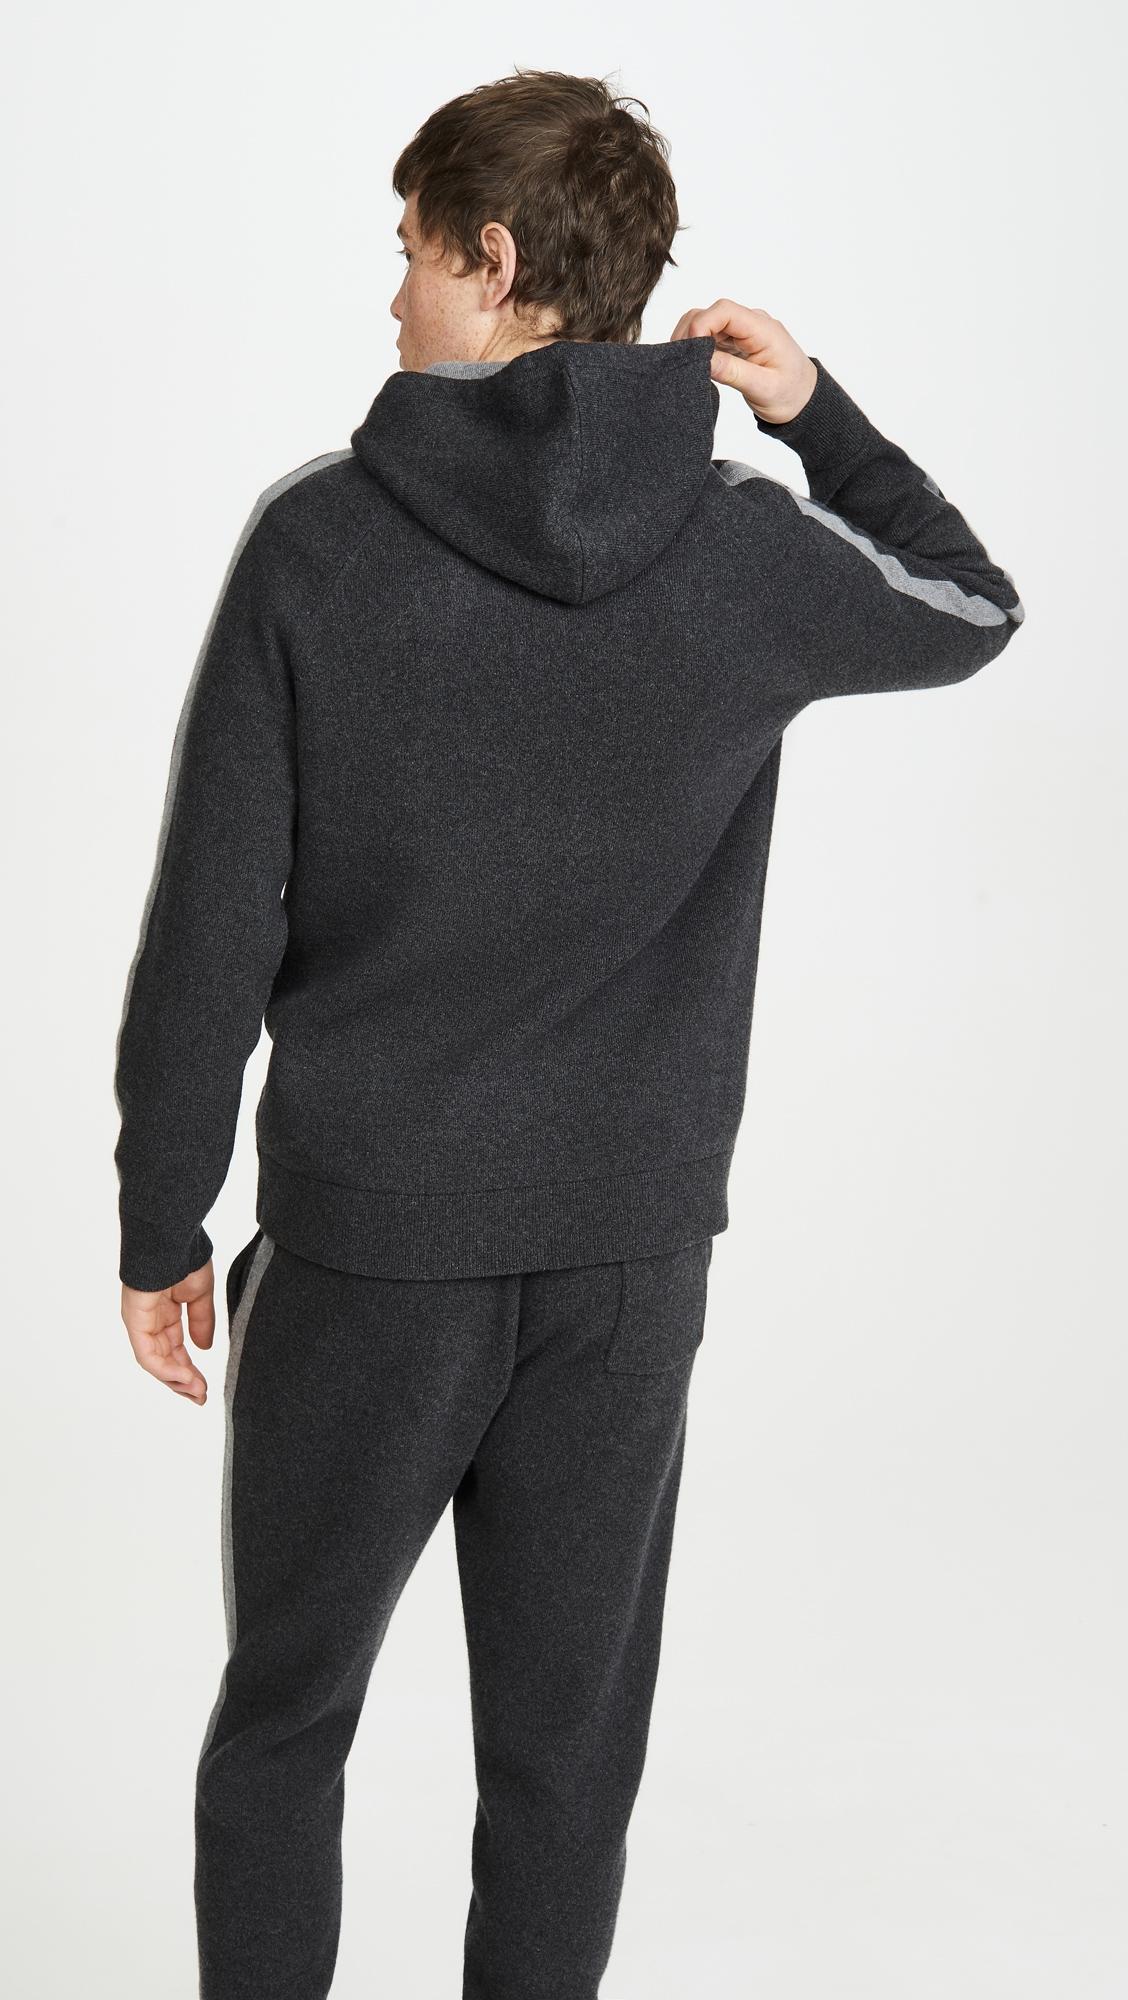 Theory Lounge Wool Cashmere Hoodie in Dark Charcoal (Gray) for Men - Lyst